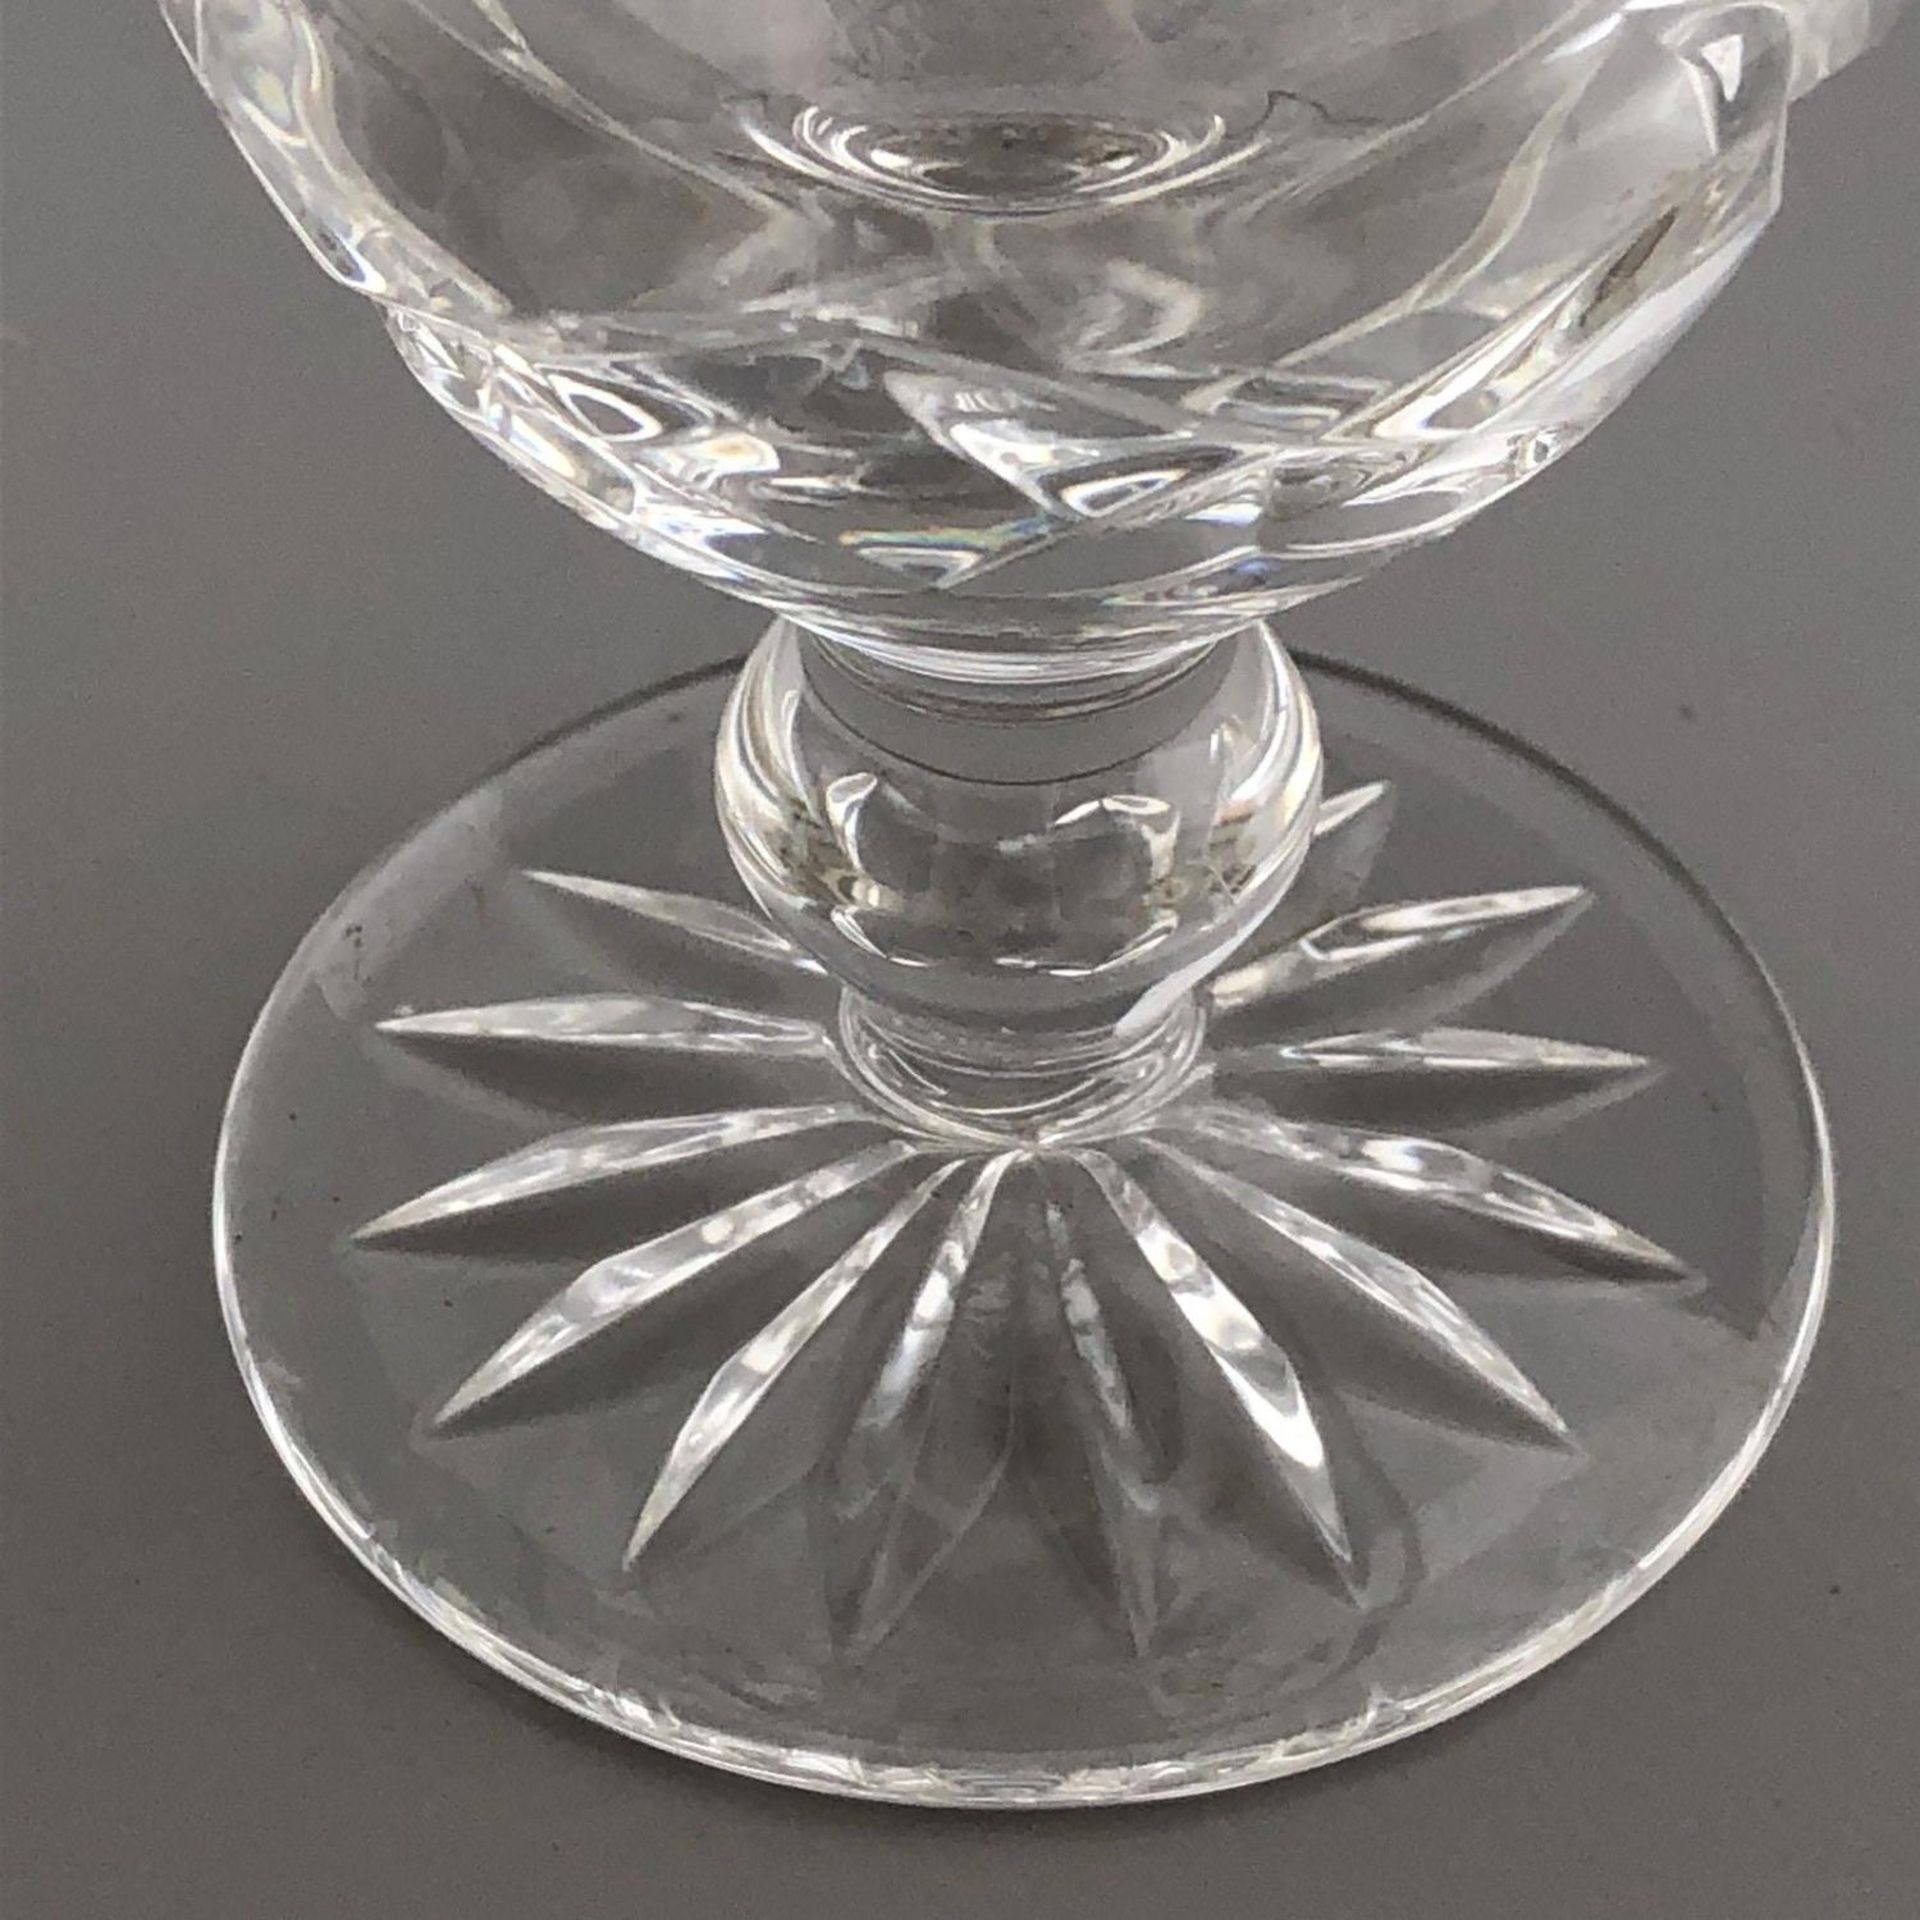 Irish Crystal - Lismore Pattern by Waterford - Large Sugar or Flour Caster - Image 3 of 7